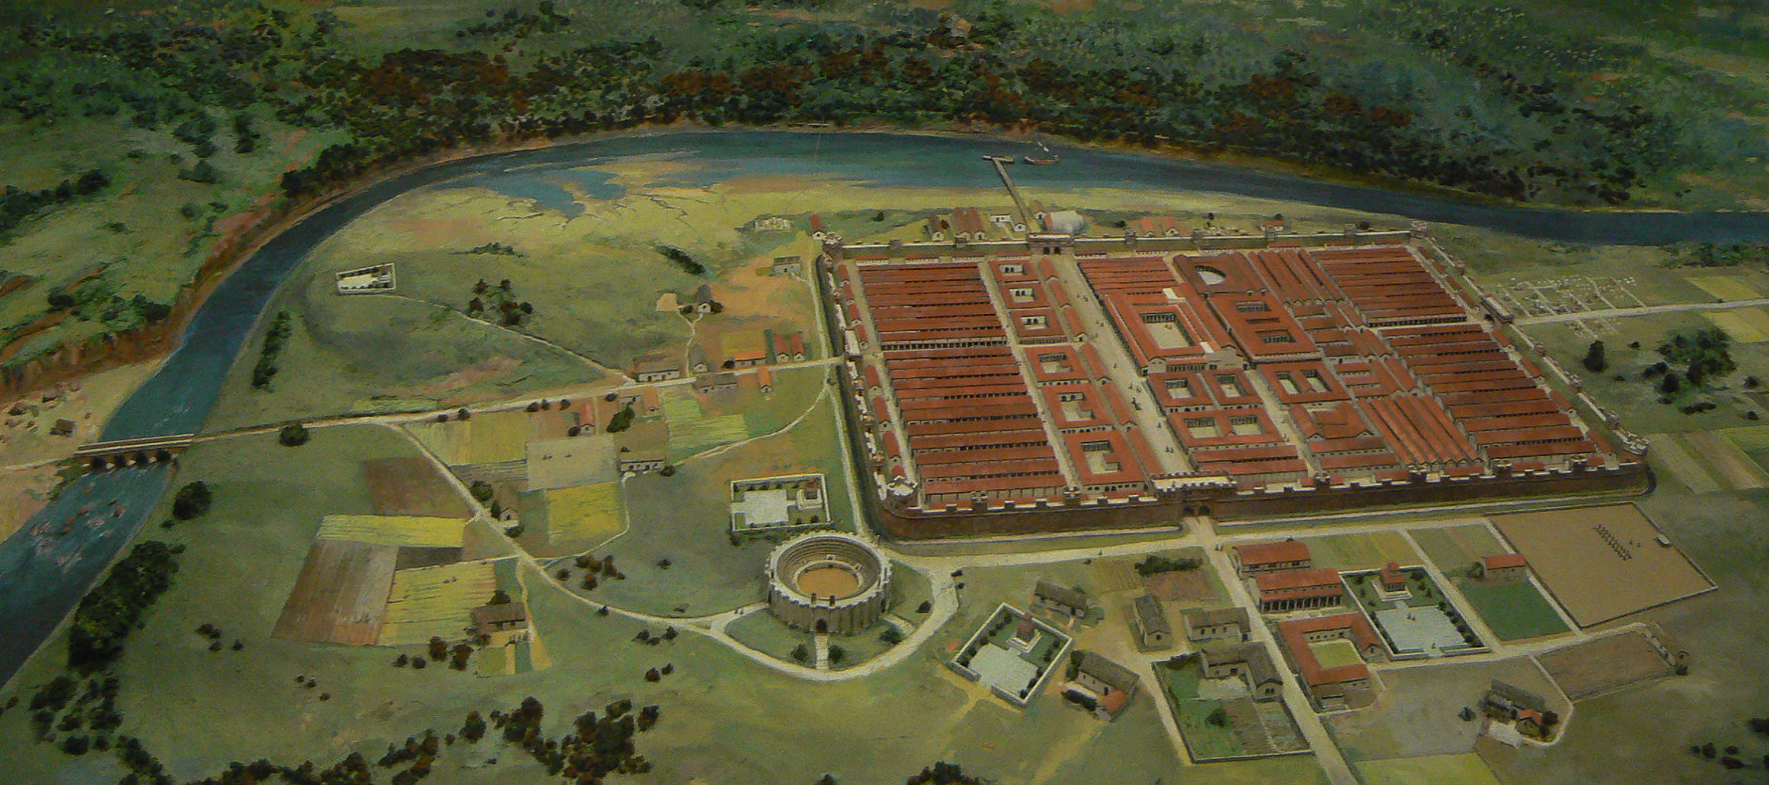 Cities for the Legions: A Brief look at the Roman Fortress